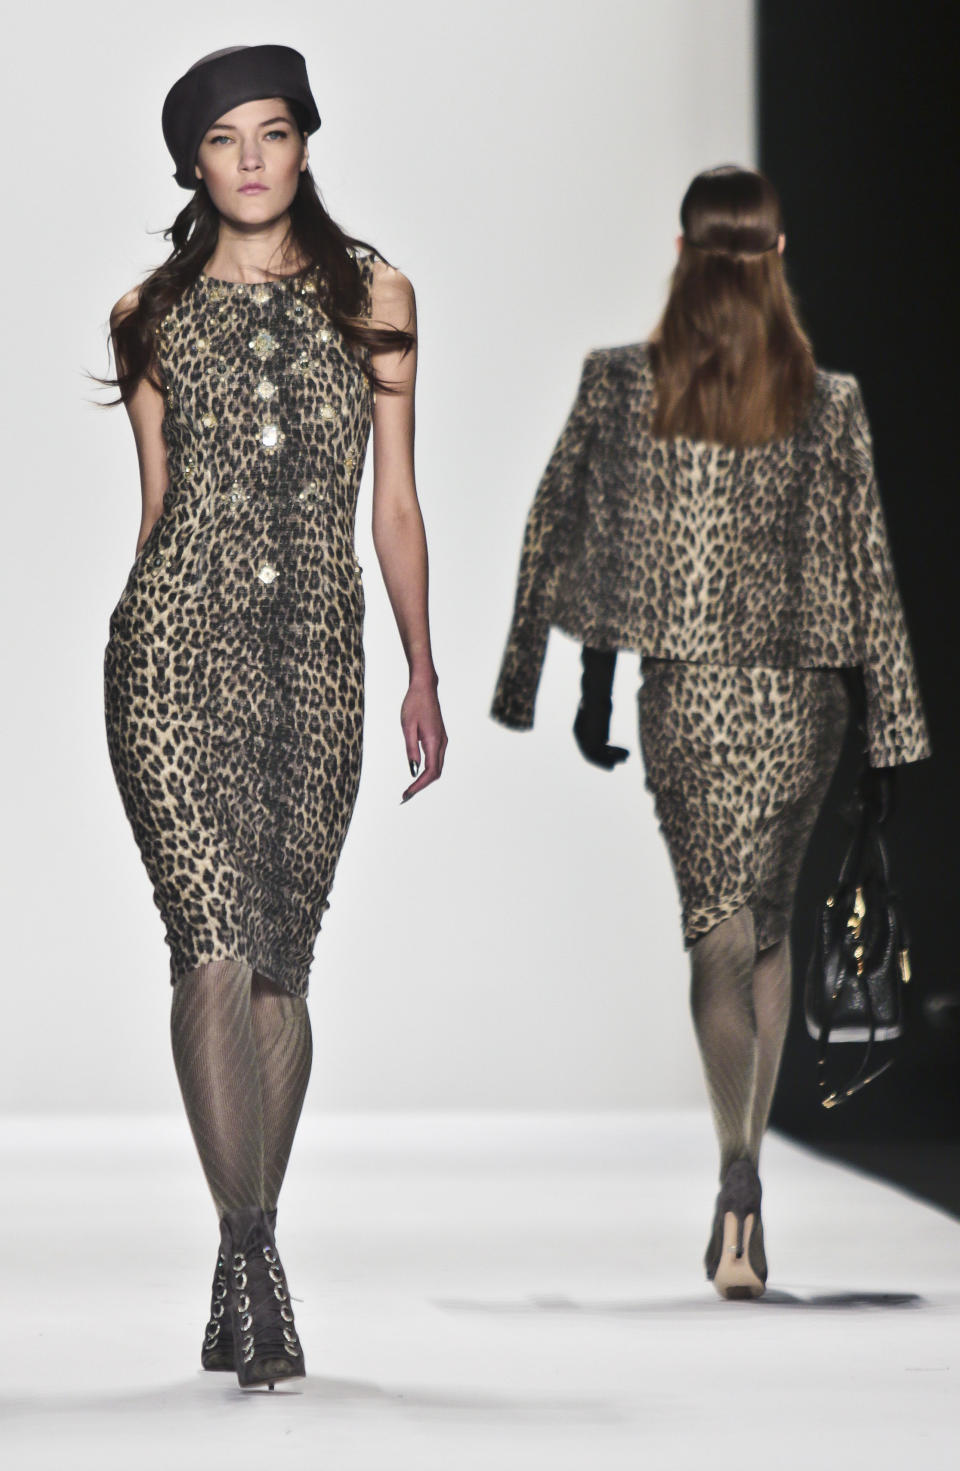 Fashion from the Badgley Mischka Fall 2014 collection is modeled during New York Fashion Week on Tuesday Feb. 11, 2014. (AP Photo/Bebeto Matthews)